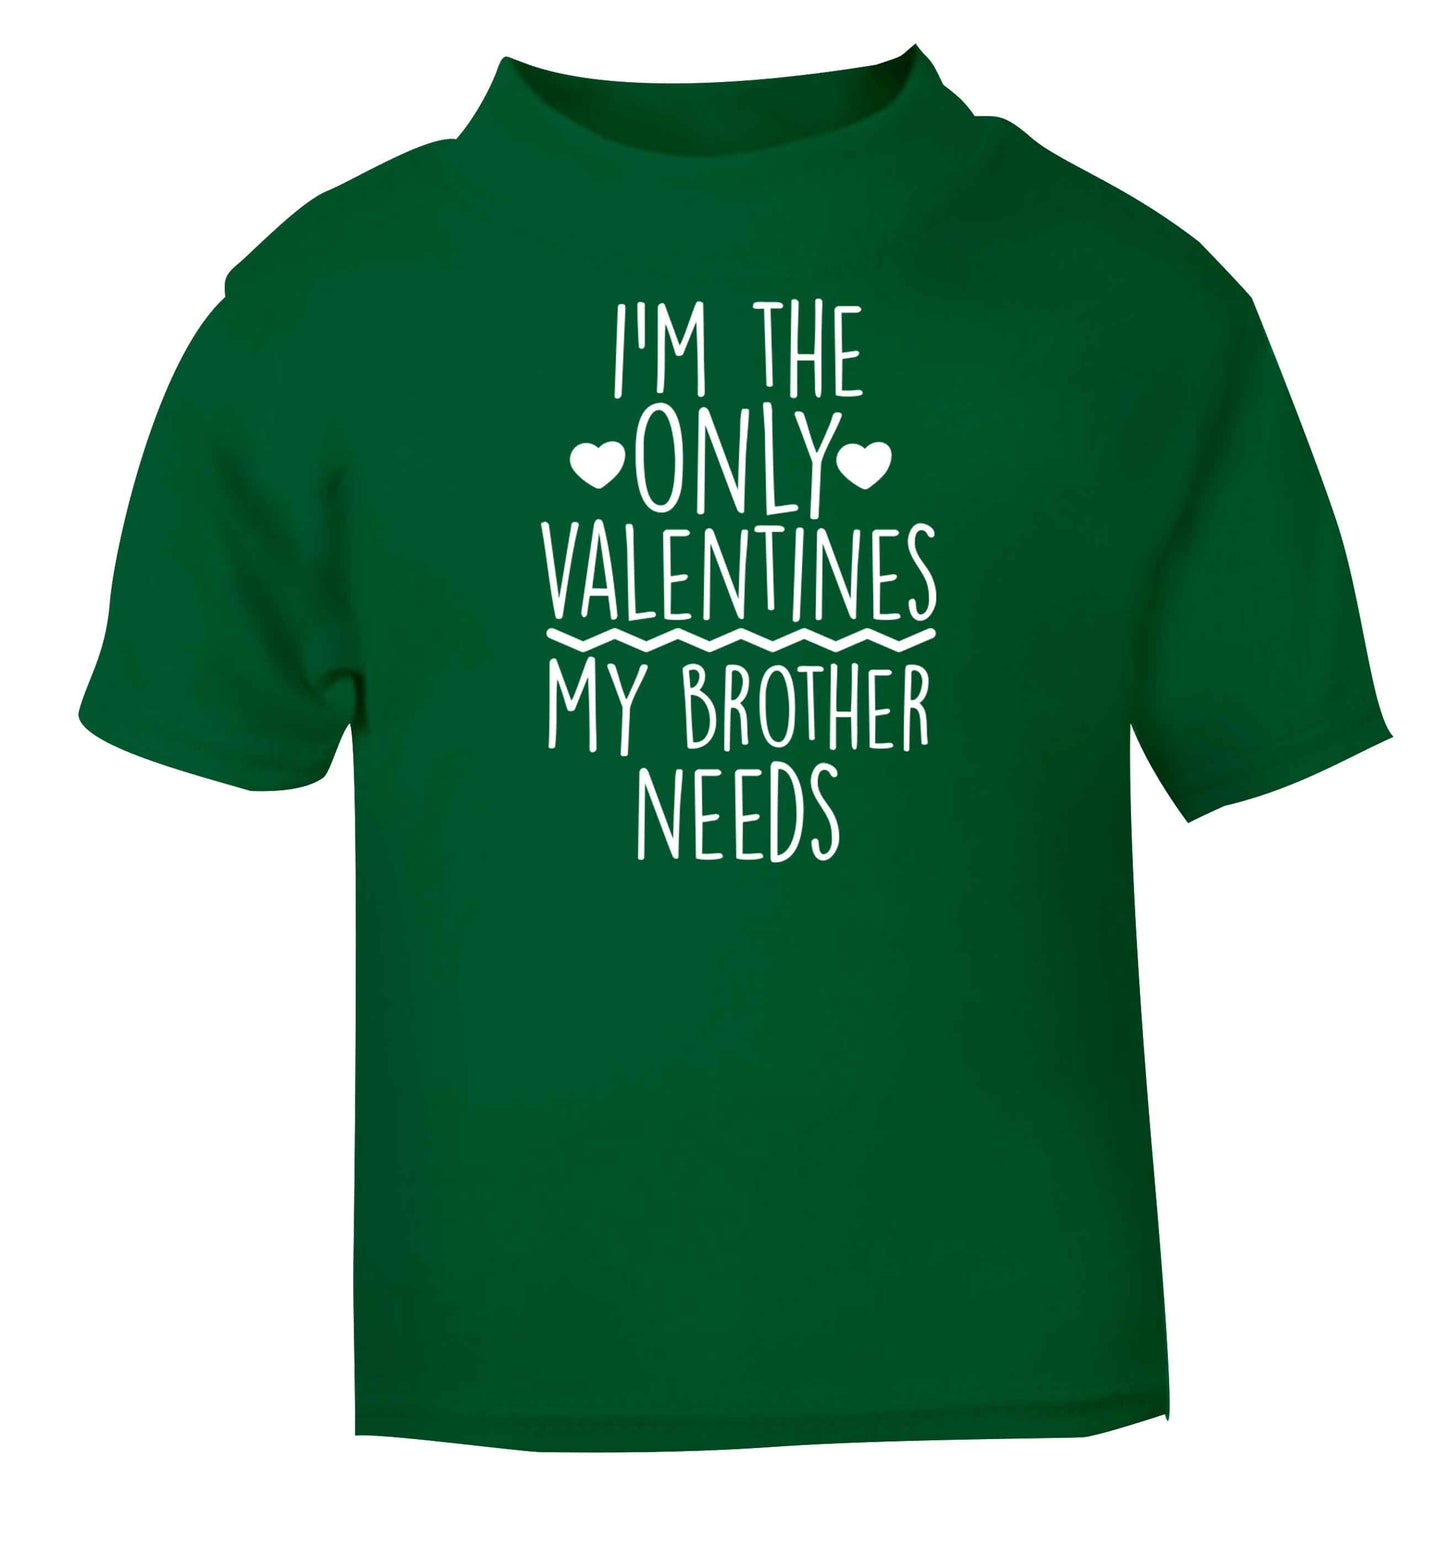 I'm the only valentines my brother needs green baby toddler Tshirt 2 Years